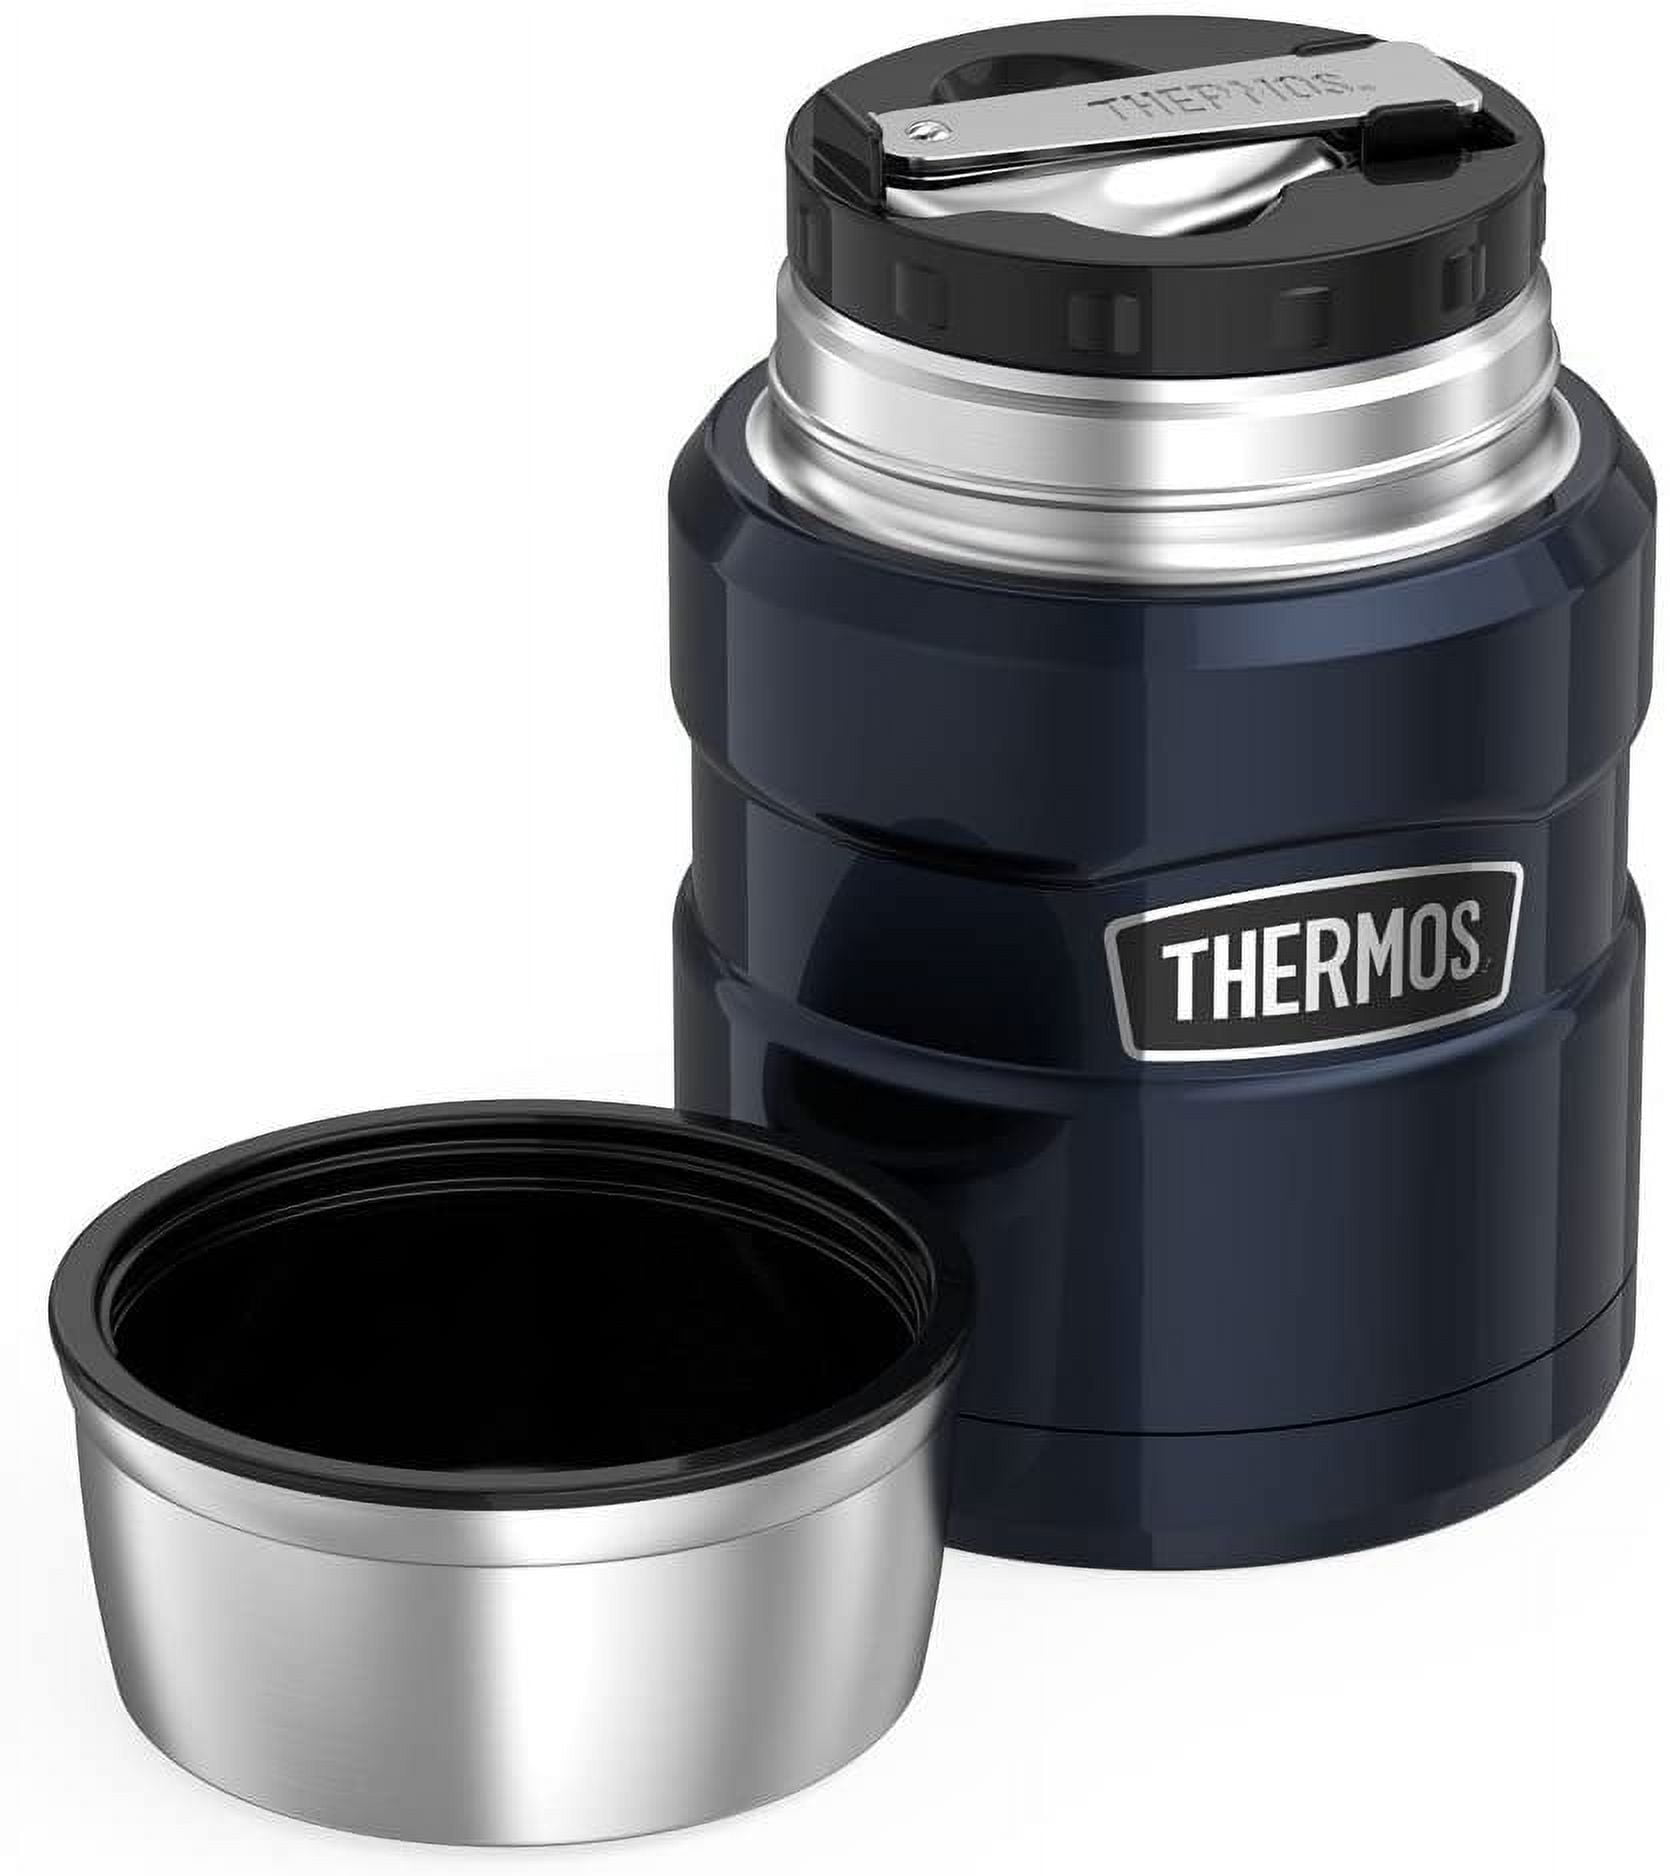 Thermoses for sale in Stewartville, Minnesota, Facebook Marketplace